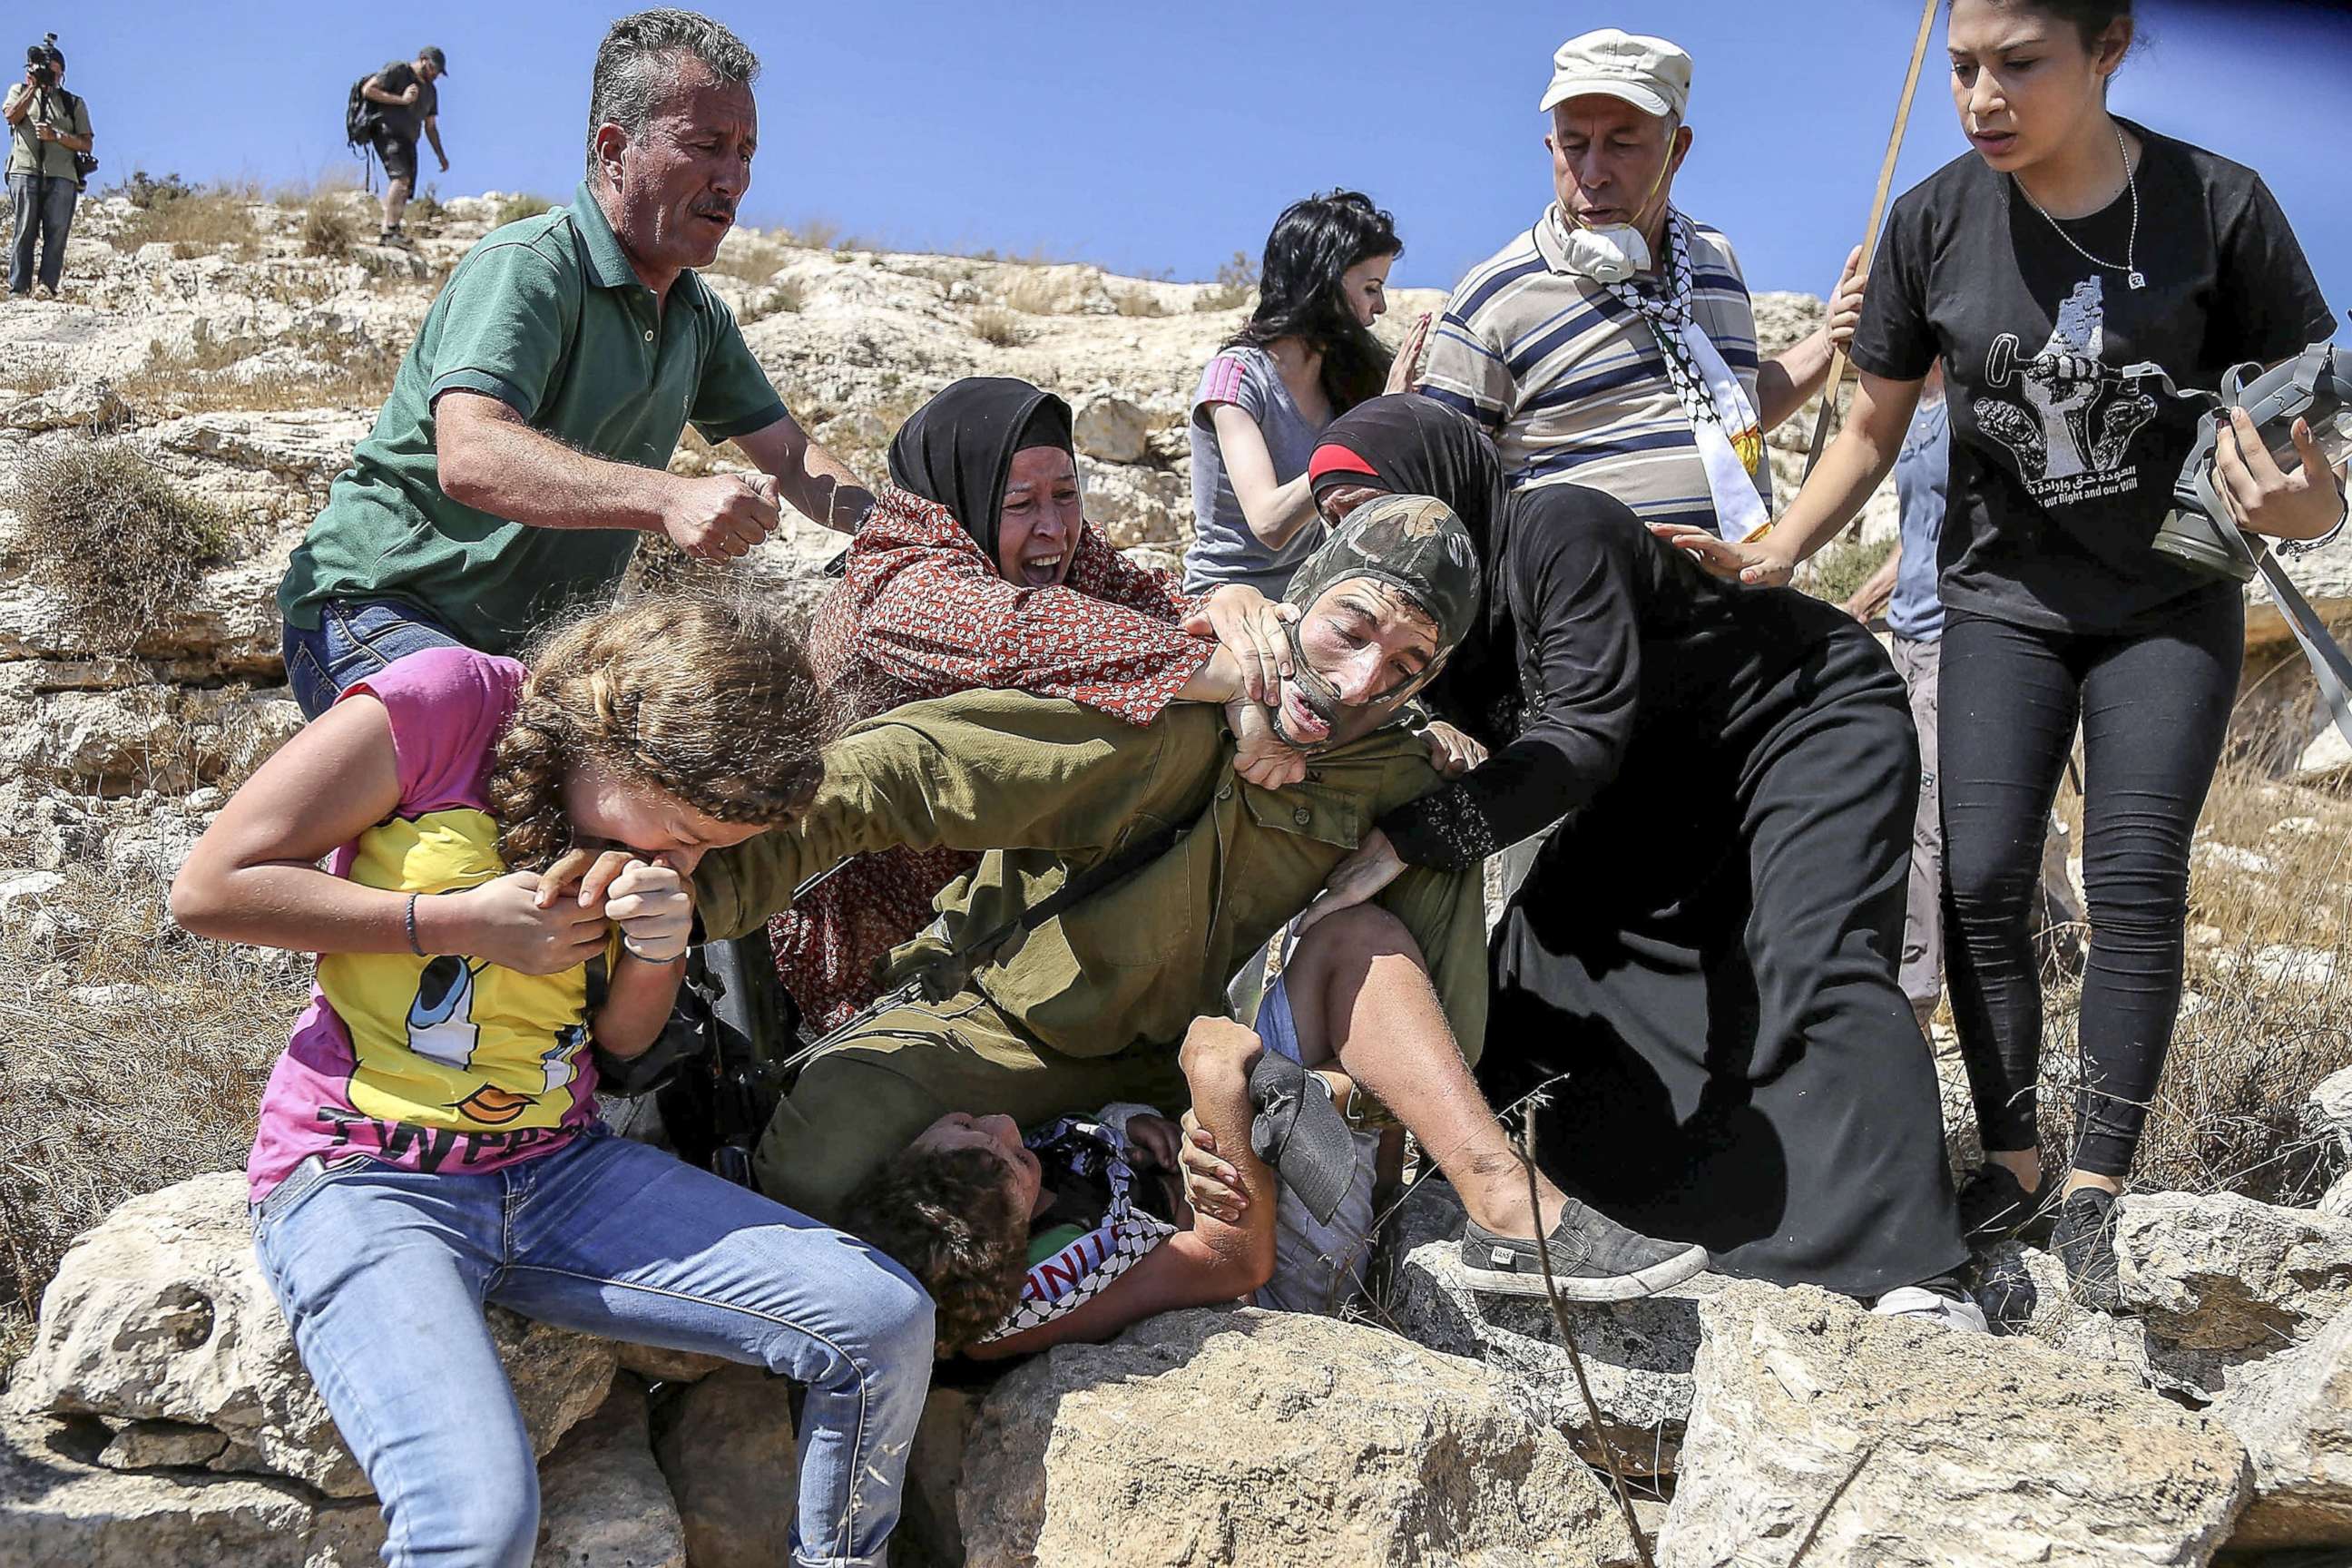 PHOTO: Ahed Tamimi reacts to an Israeli soldier attempts to arrest a Palestinian kid during the clashes following a protest against expropriation of Palestinian land in the West Bank, Aug.28, 2015.